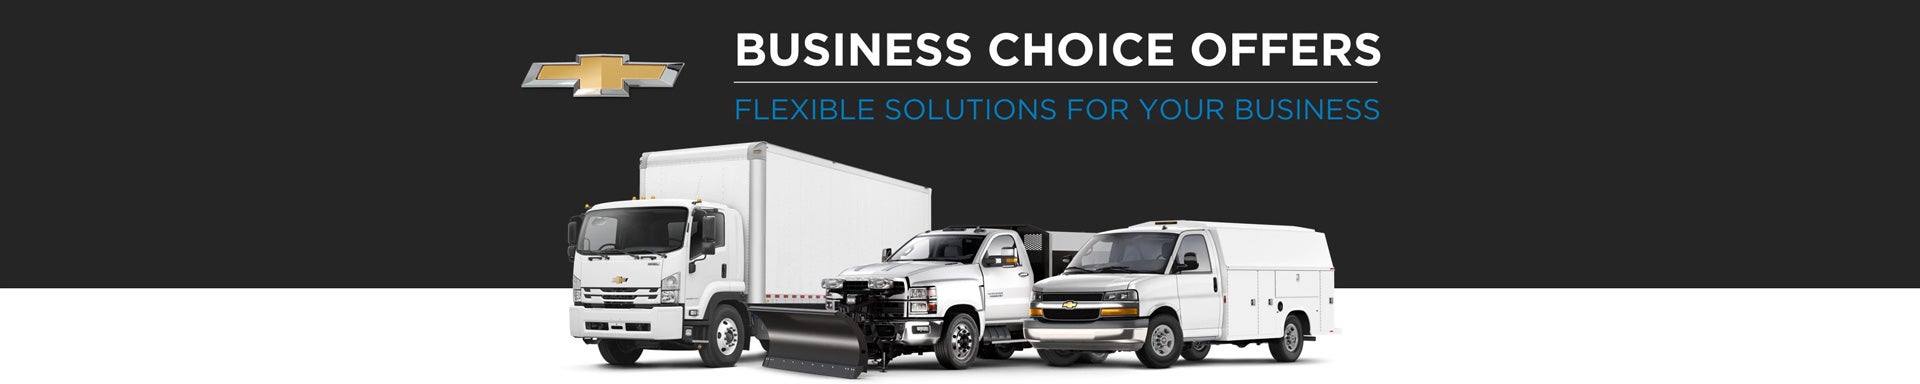 Chevrolet Business Choice Offers - Flexible Solutions for your Business - Beadles Chevrolet GMC in Mobridge SD